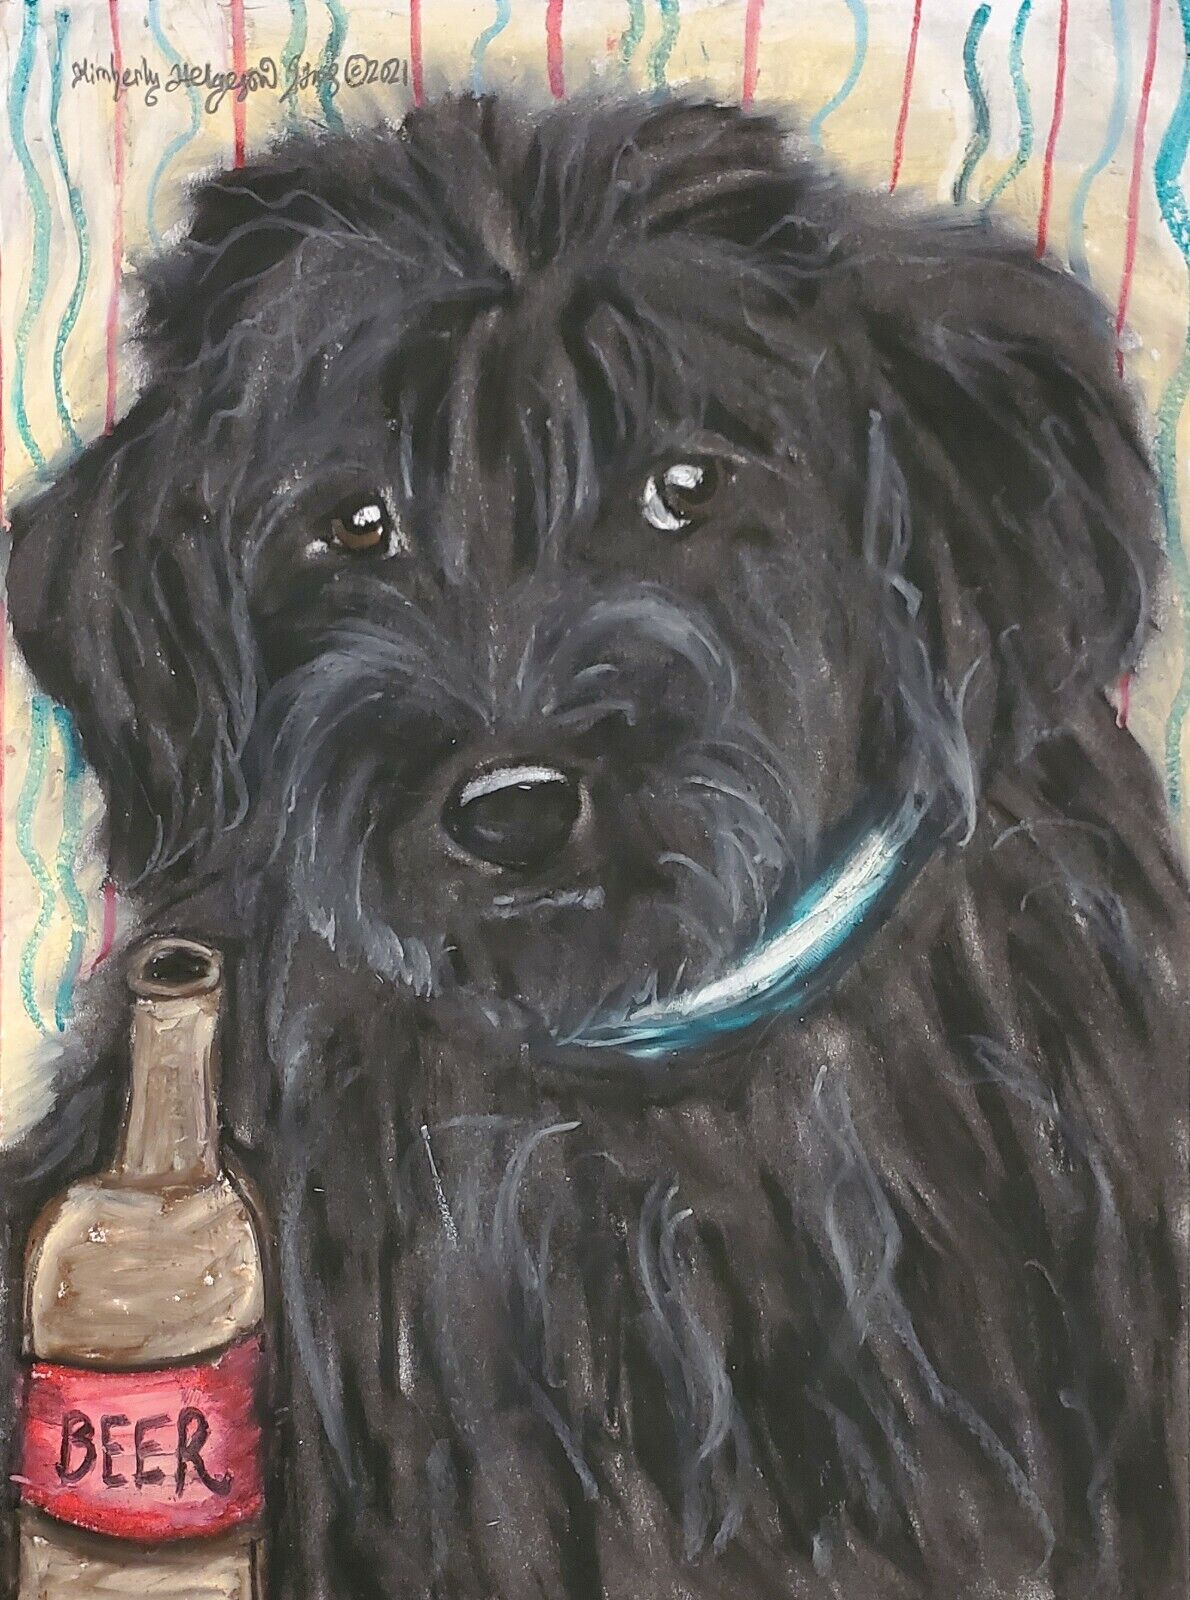 5x7 Black LABRADOODLE Drinking a Beer Dog Art PRINT of Painting Artwork by KSams